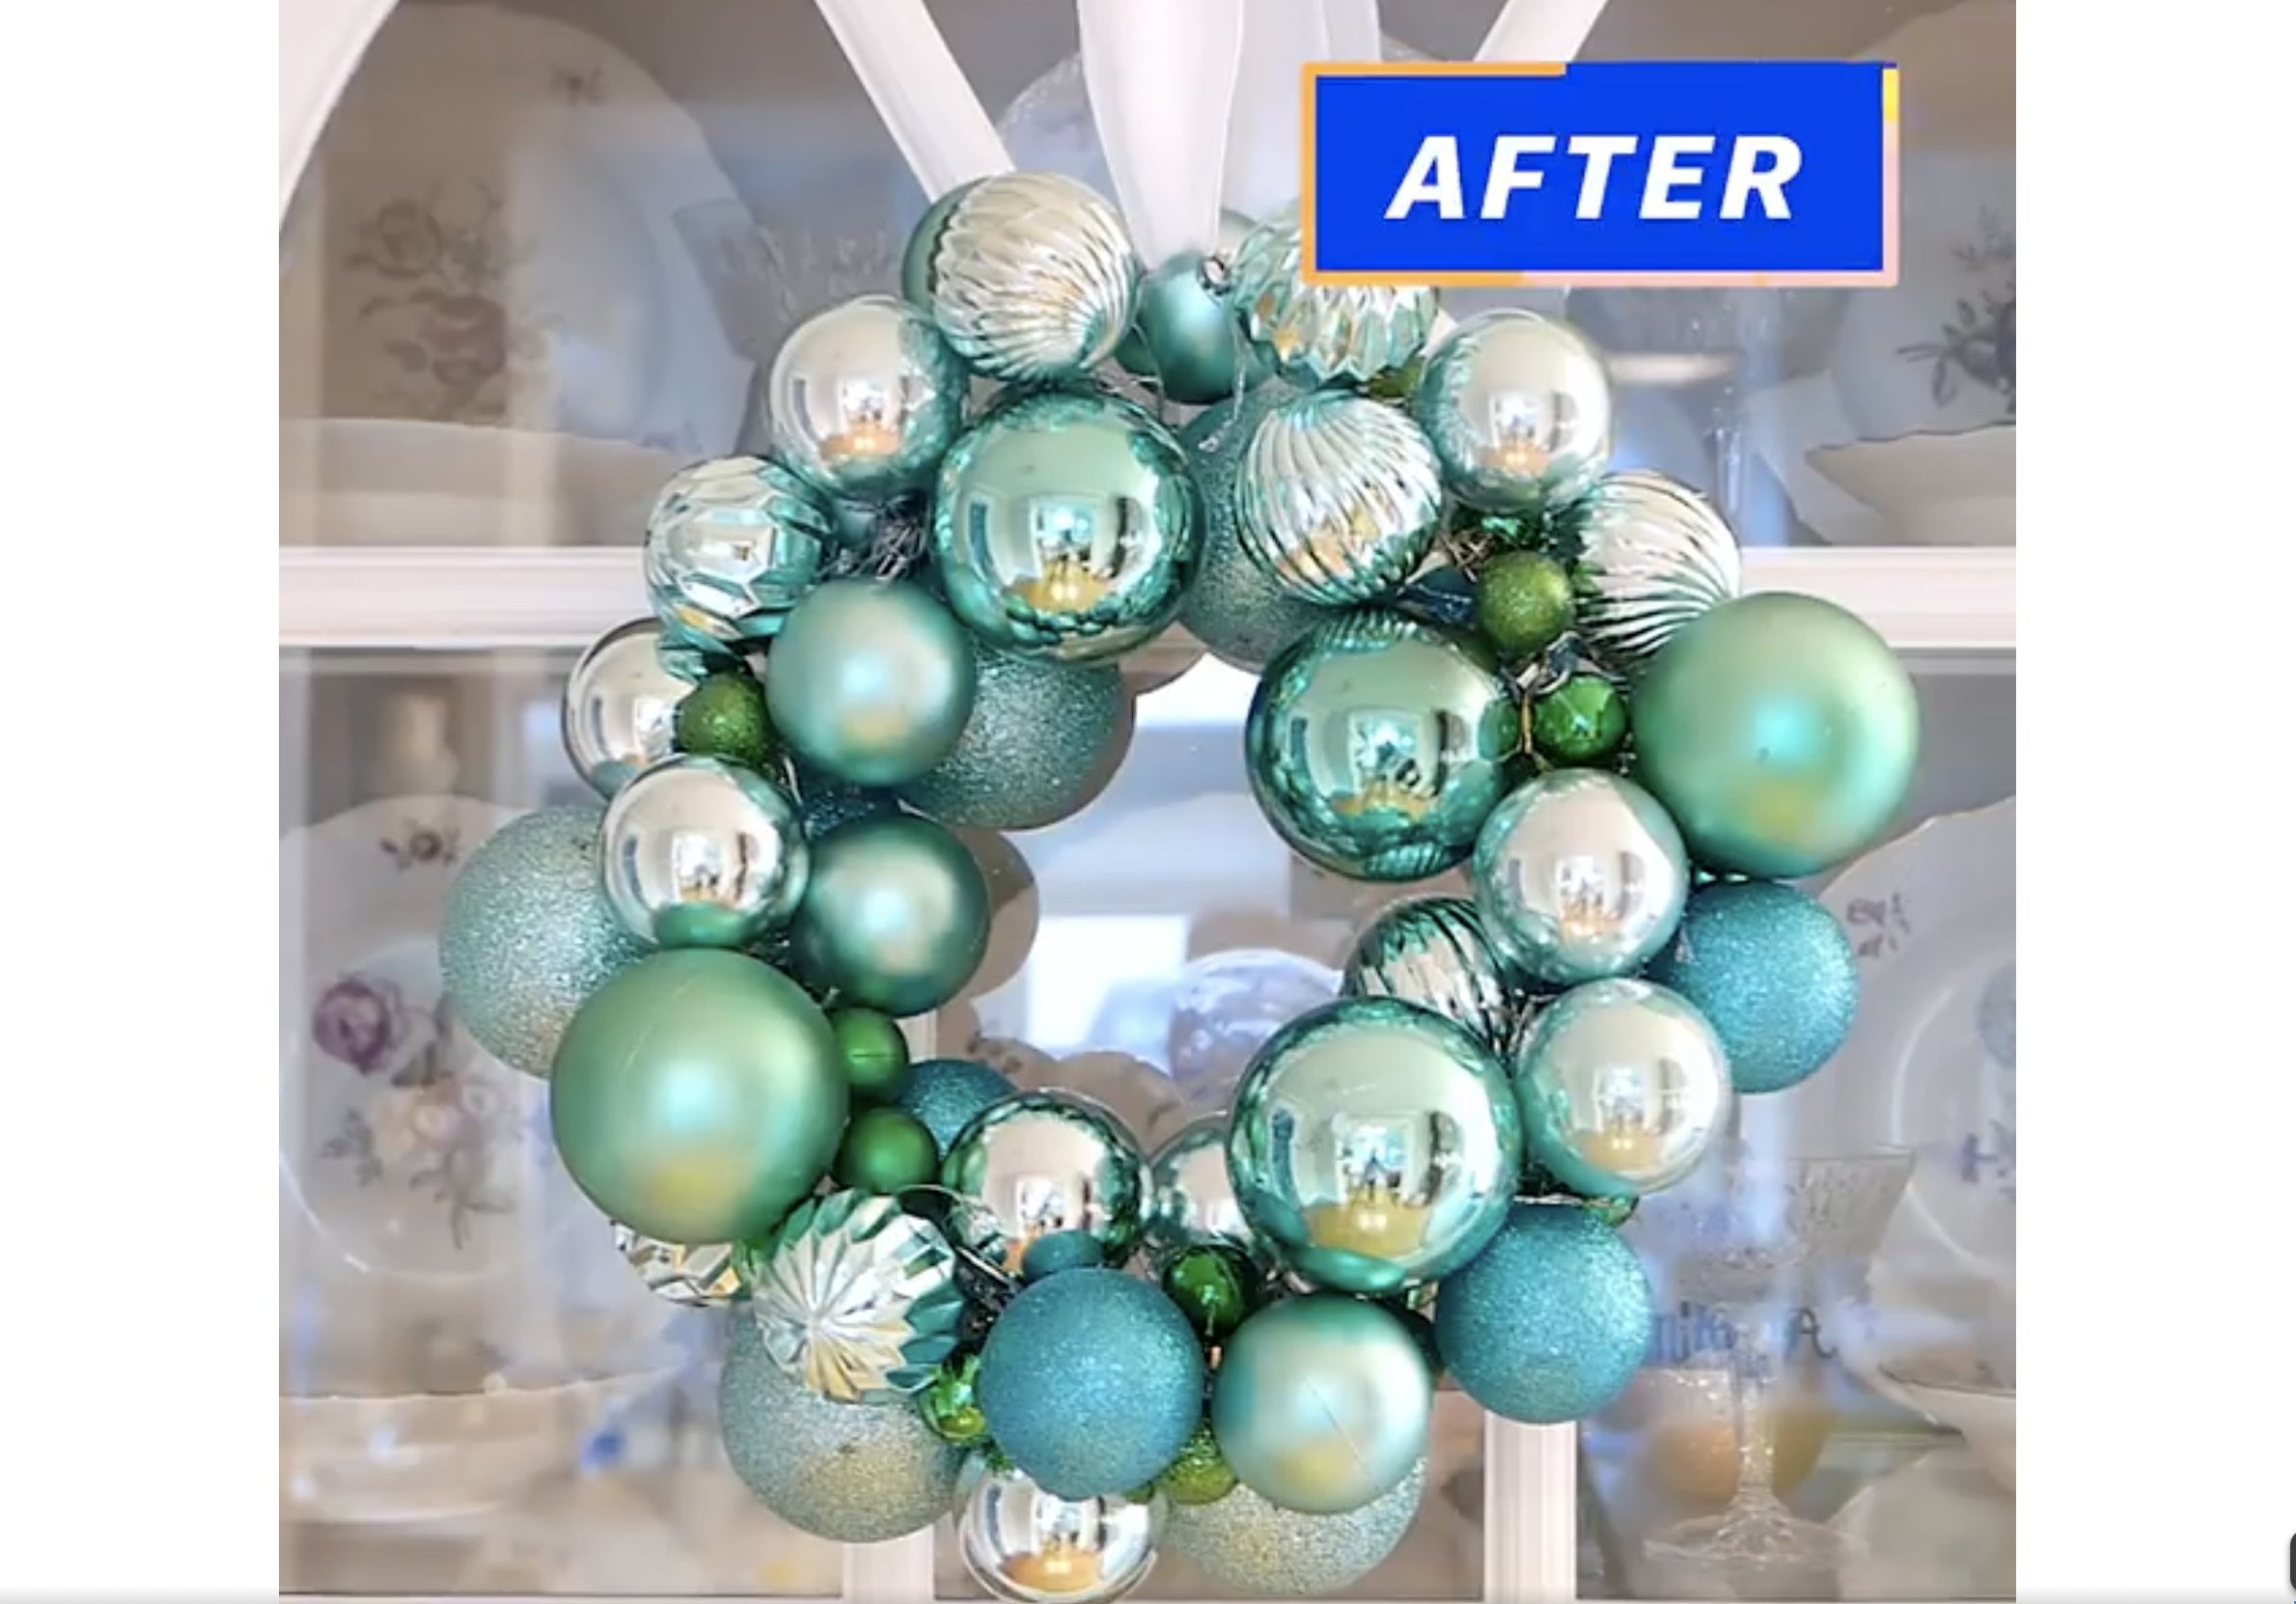 A wreath made from Christmas ball ornaments